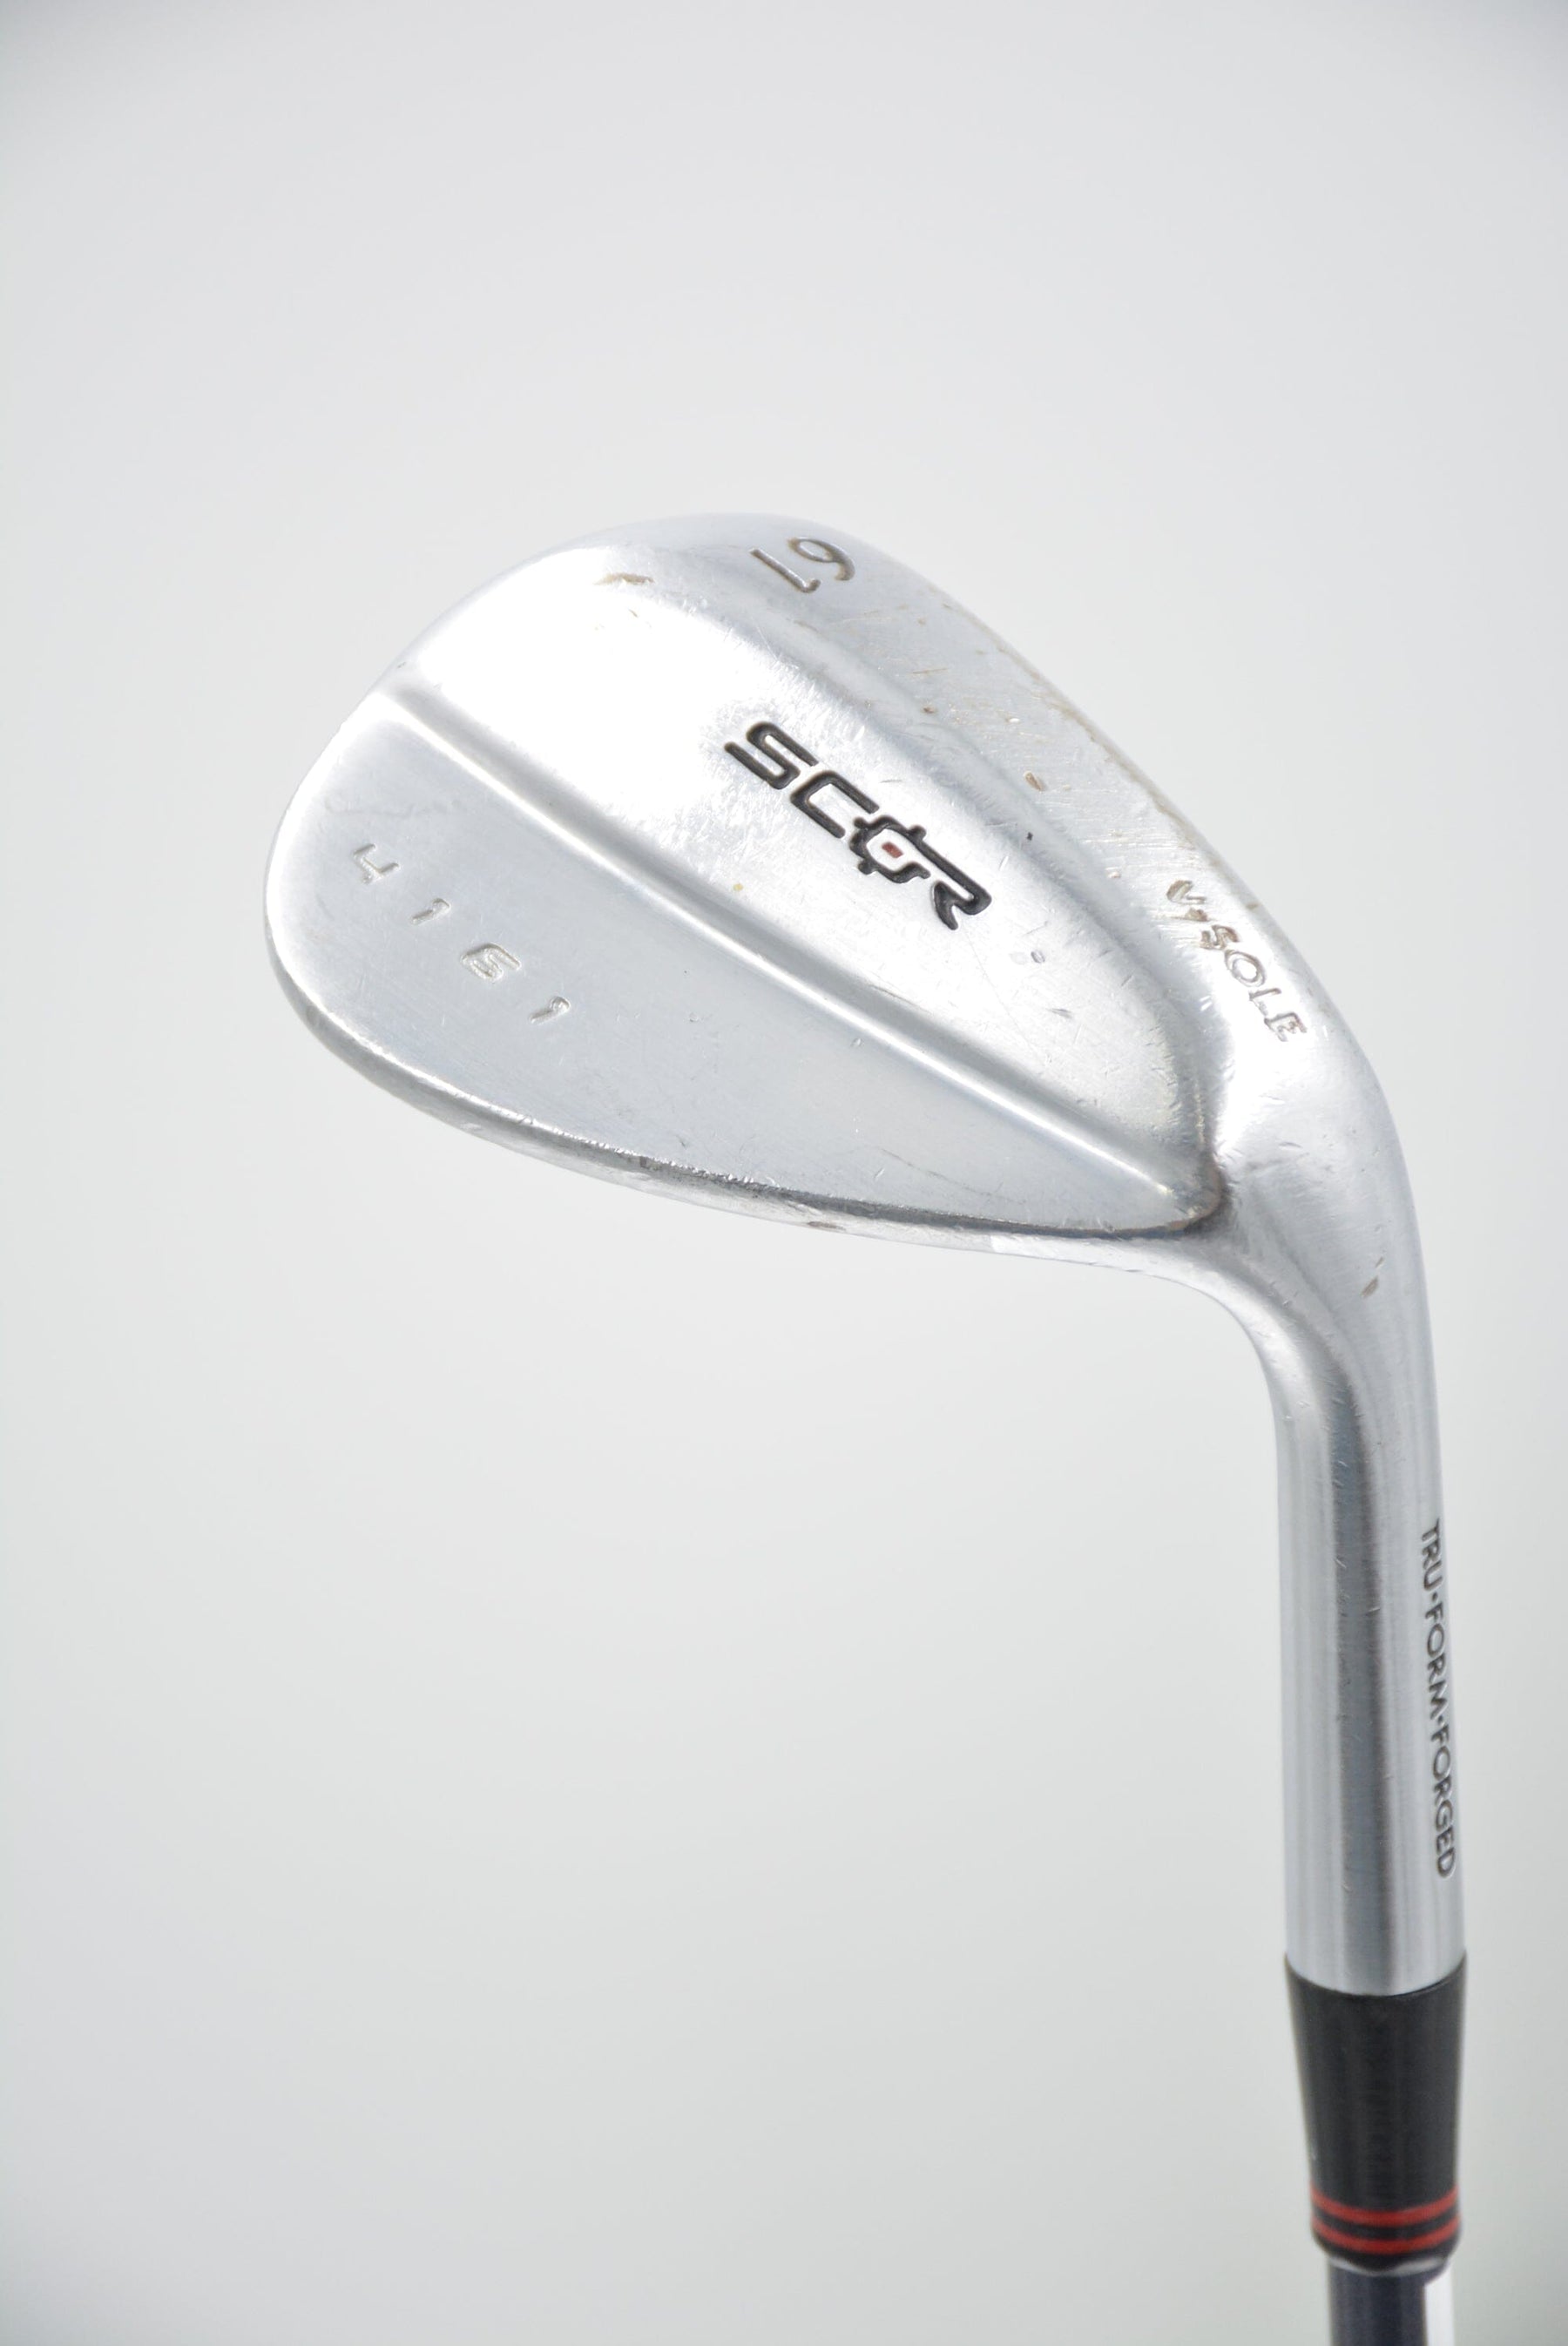 Scor V-Sole 61 Degree Wedge S Flex Golf Clubs GolfRoots 